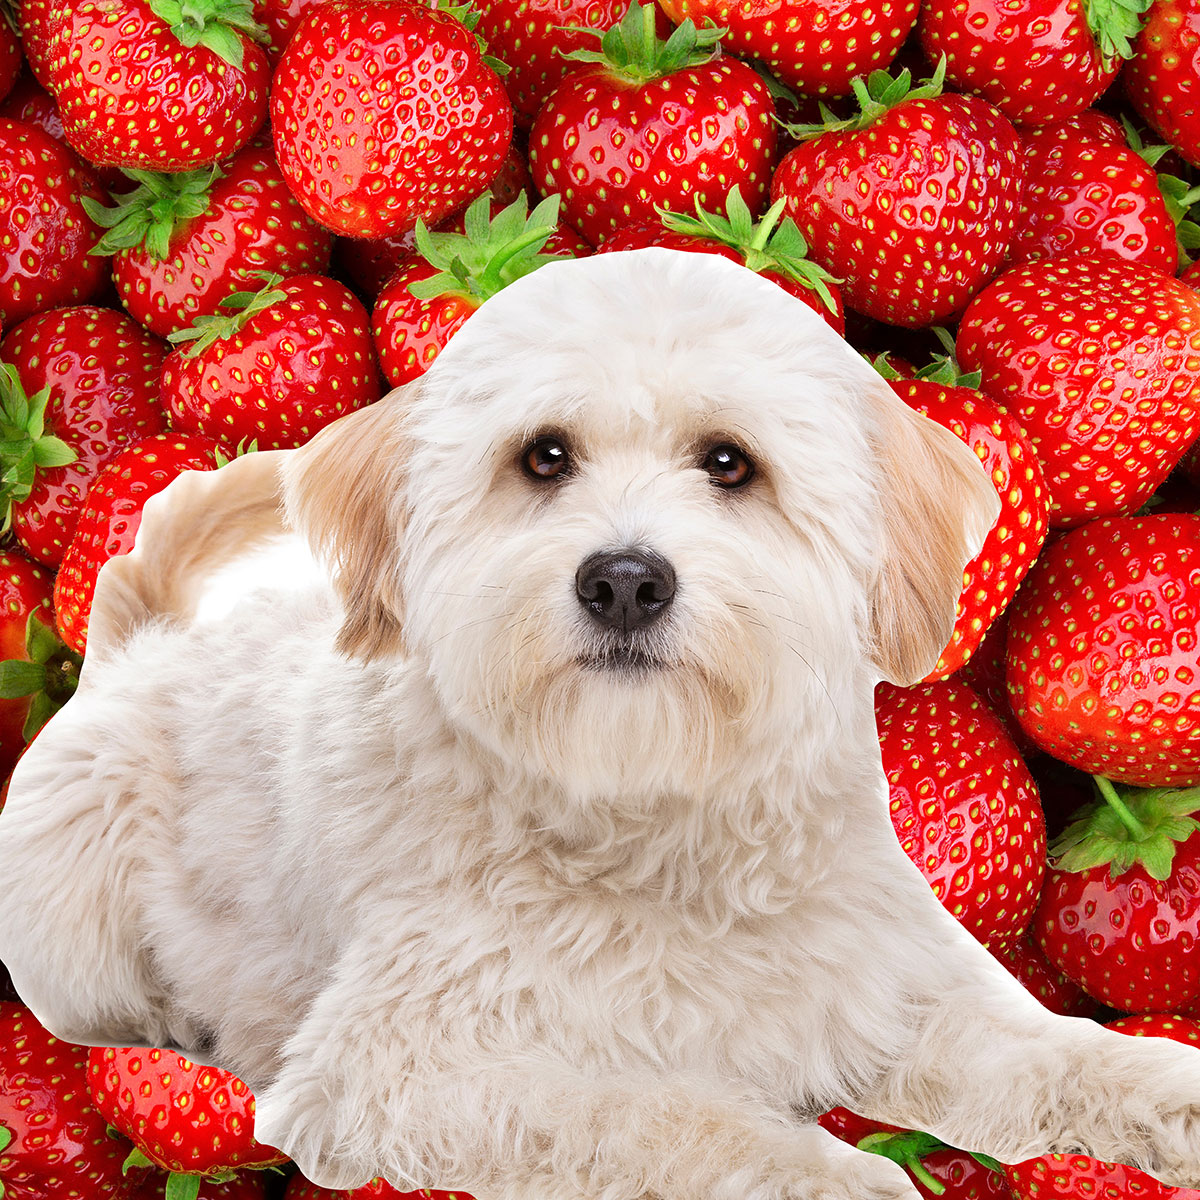 White dog in front of strawberries.